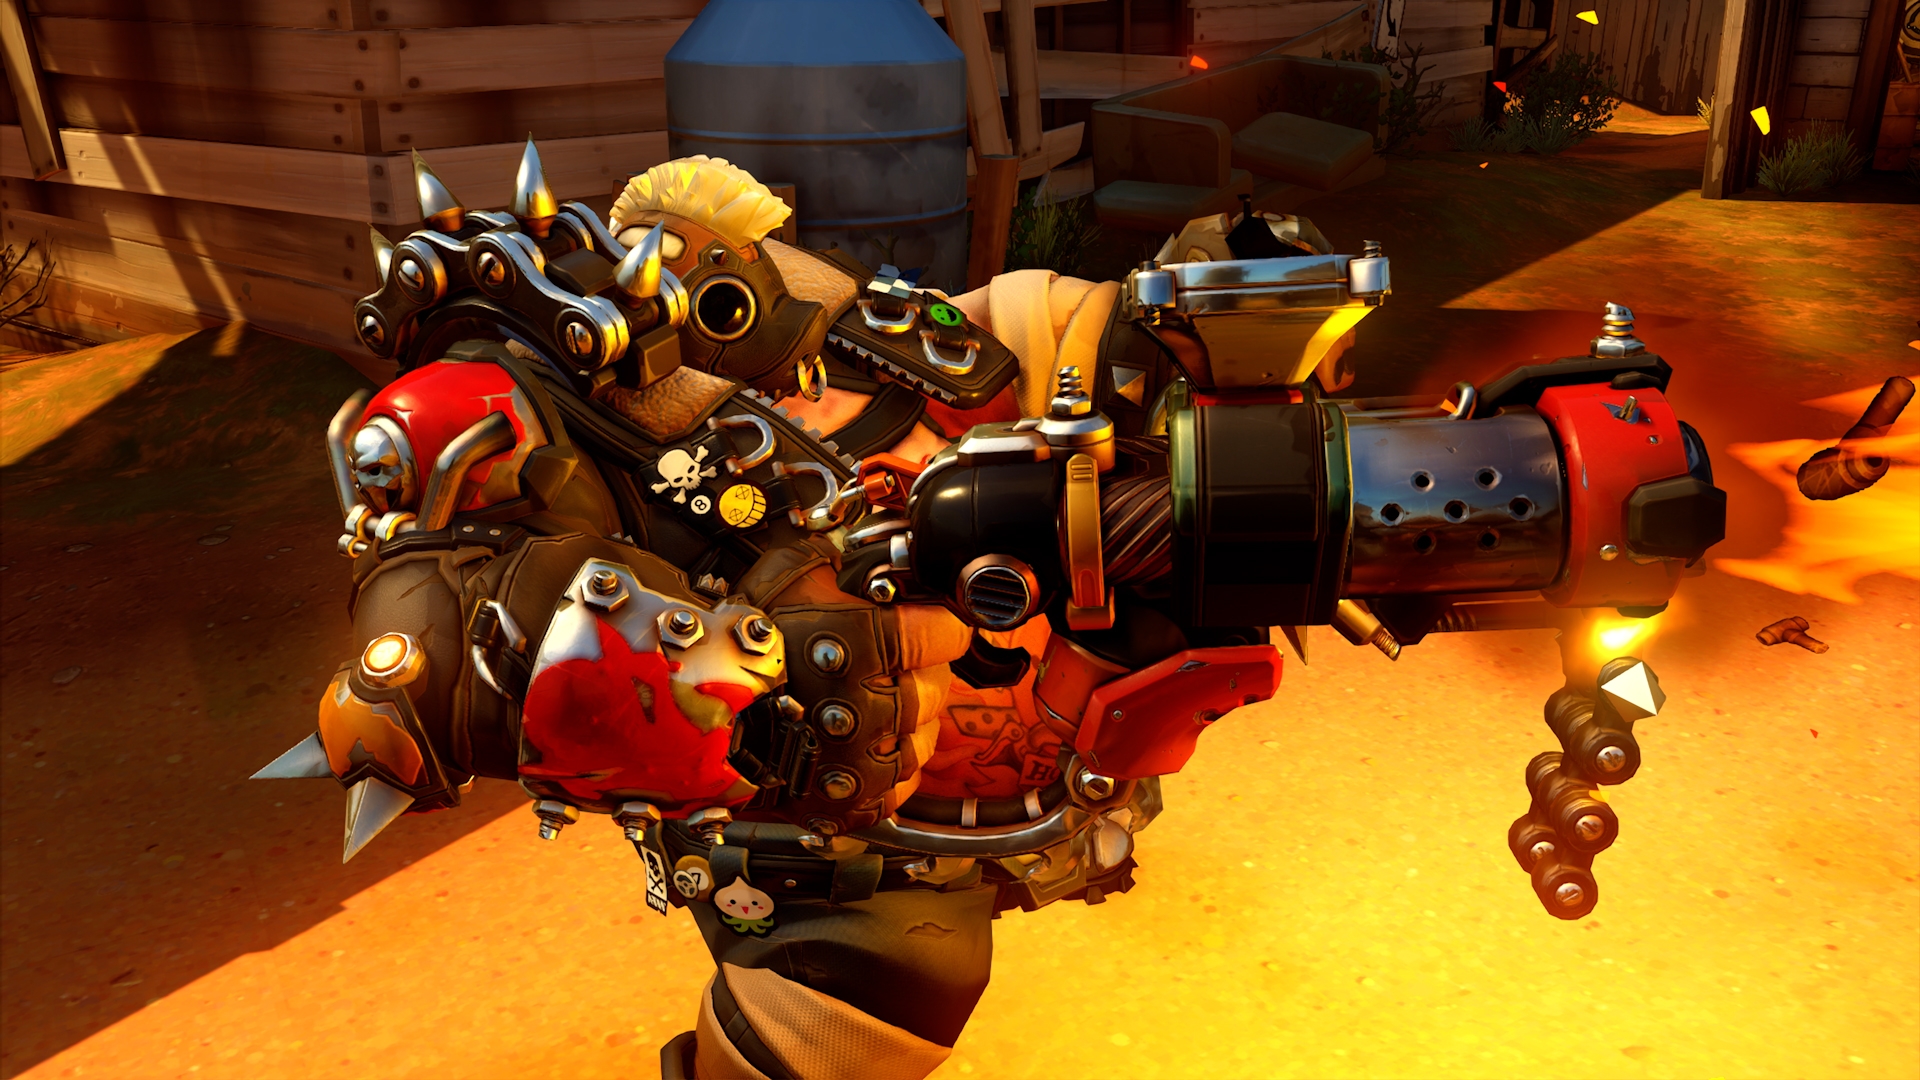 Roadhog uses his Whole Hog ability in a screenshot from the original Overwatch